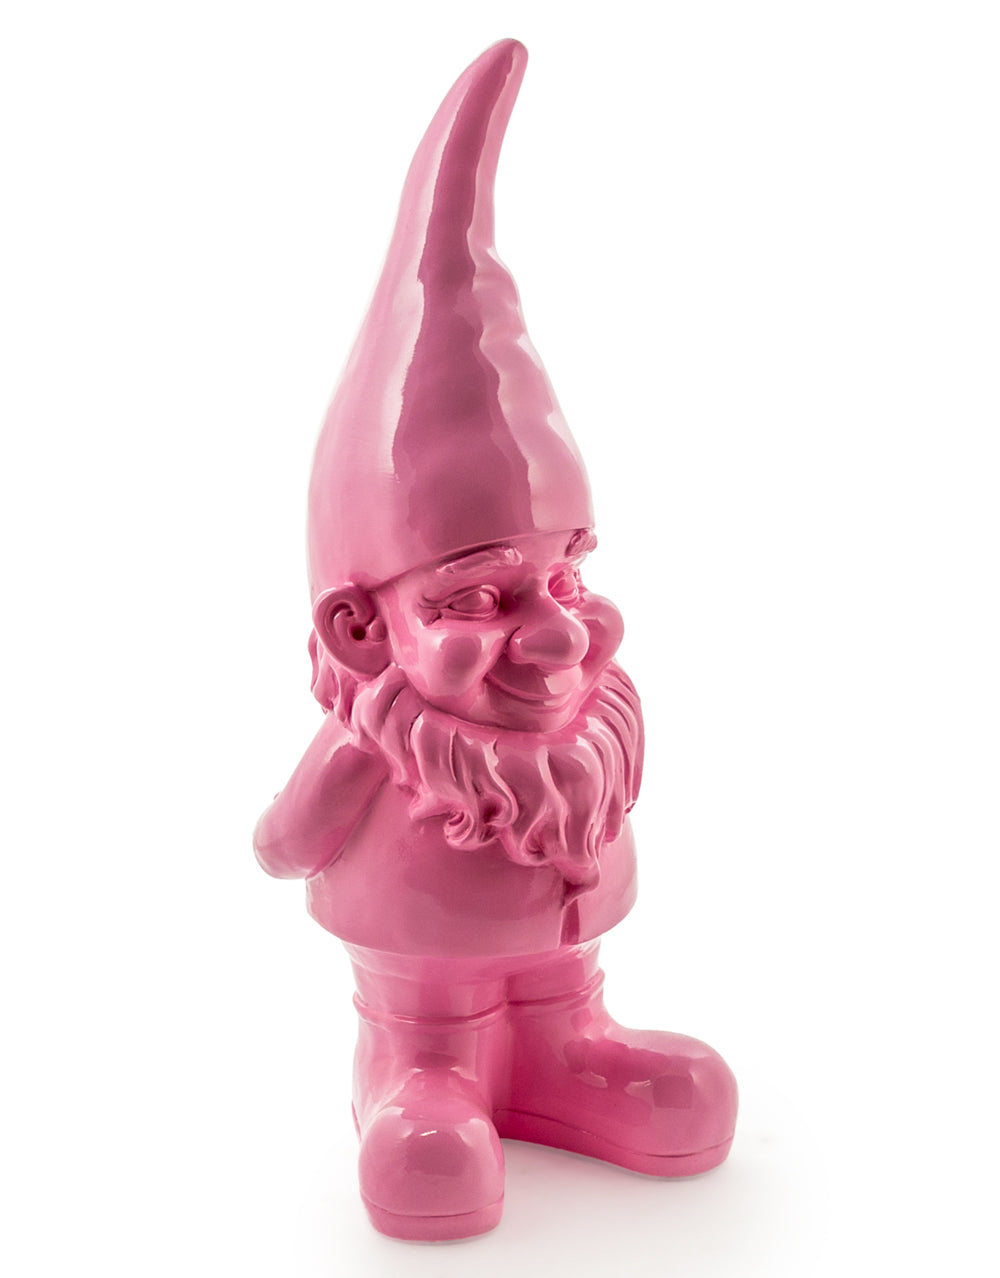 Large Bright Pink Standing Gnome Figure